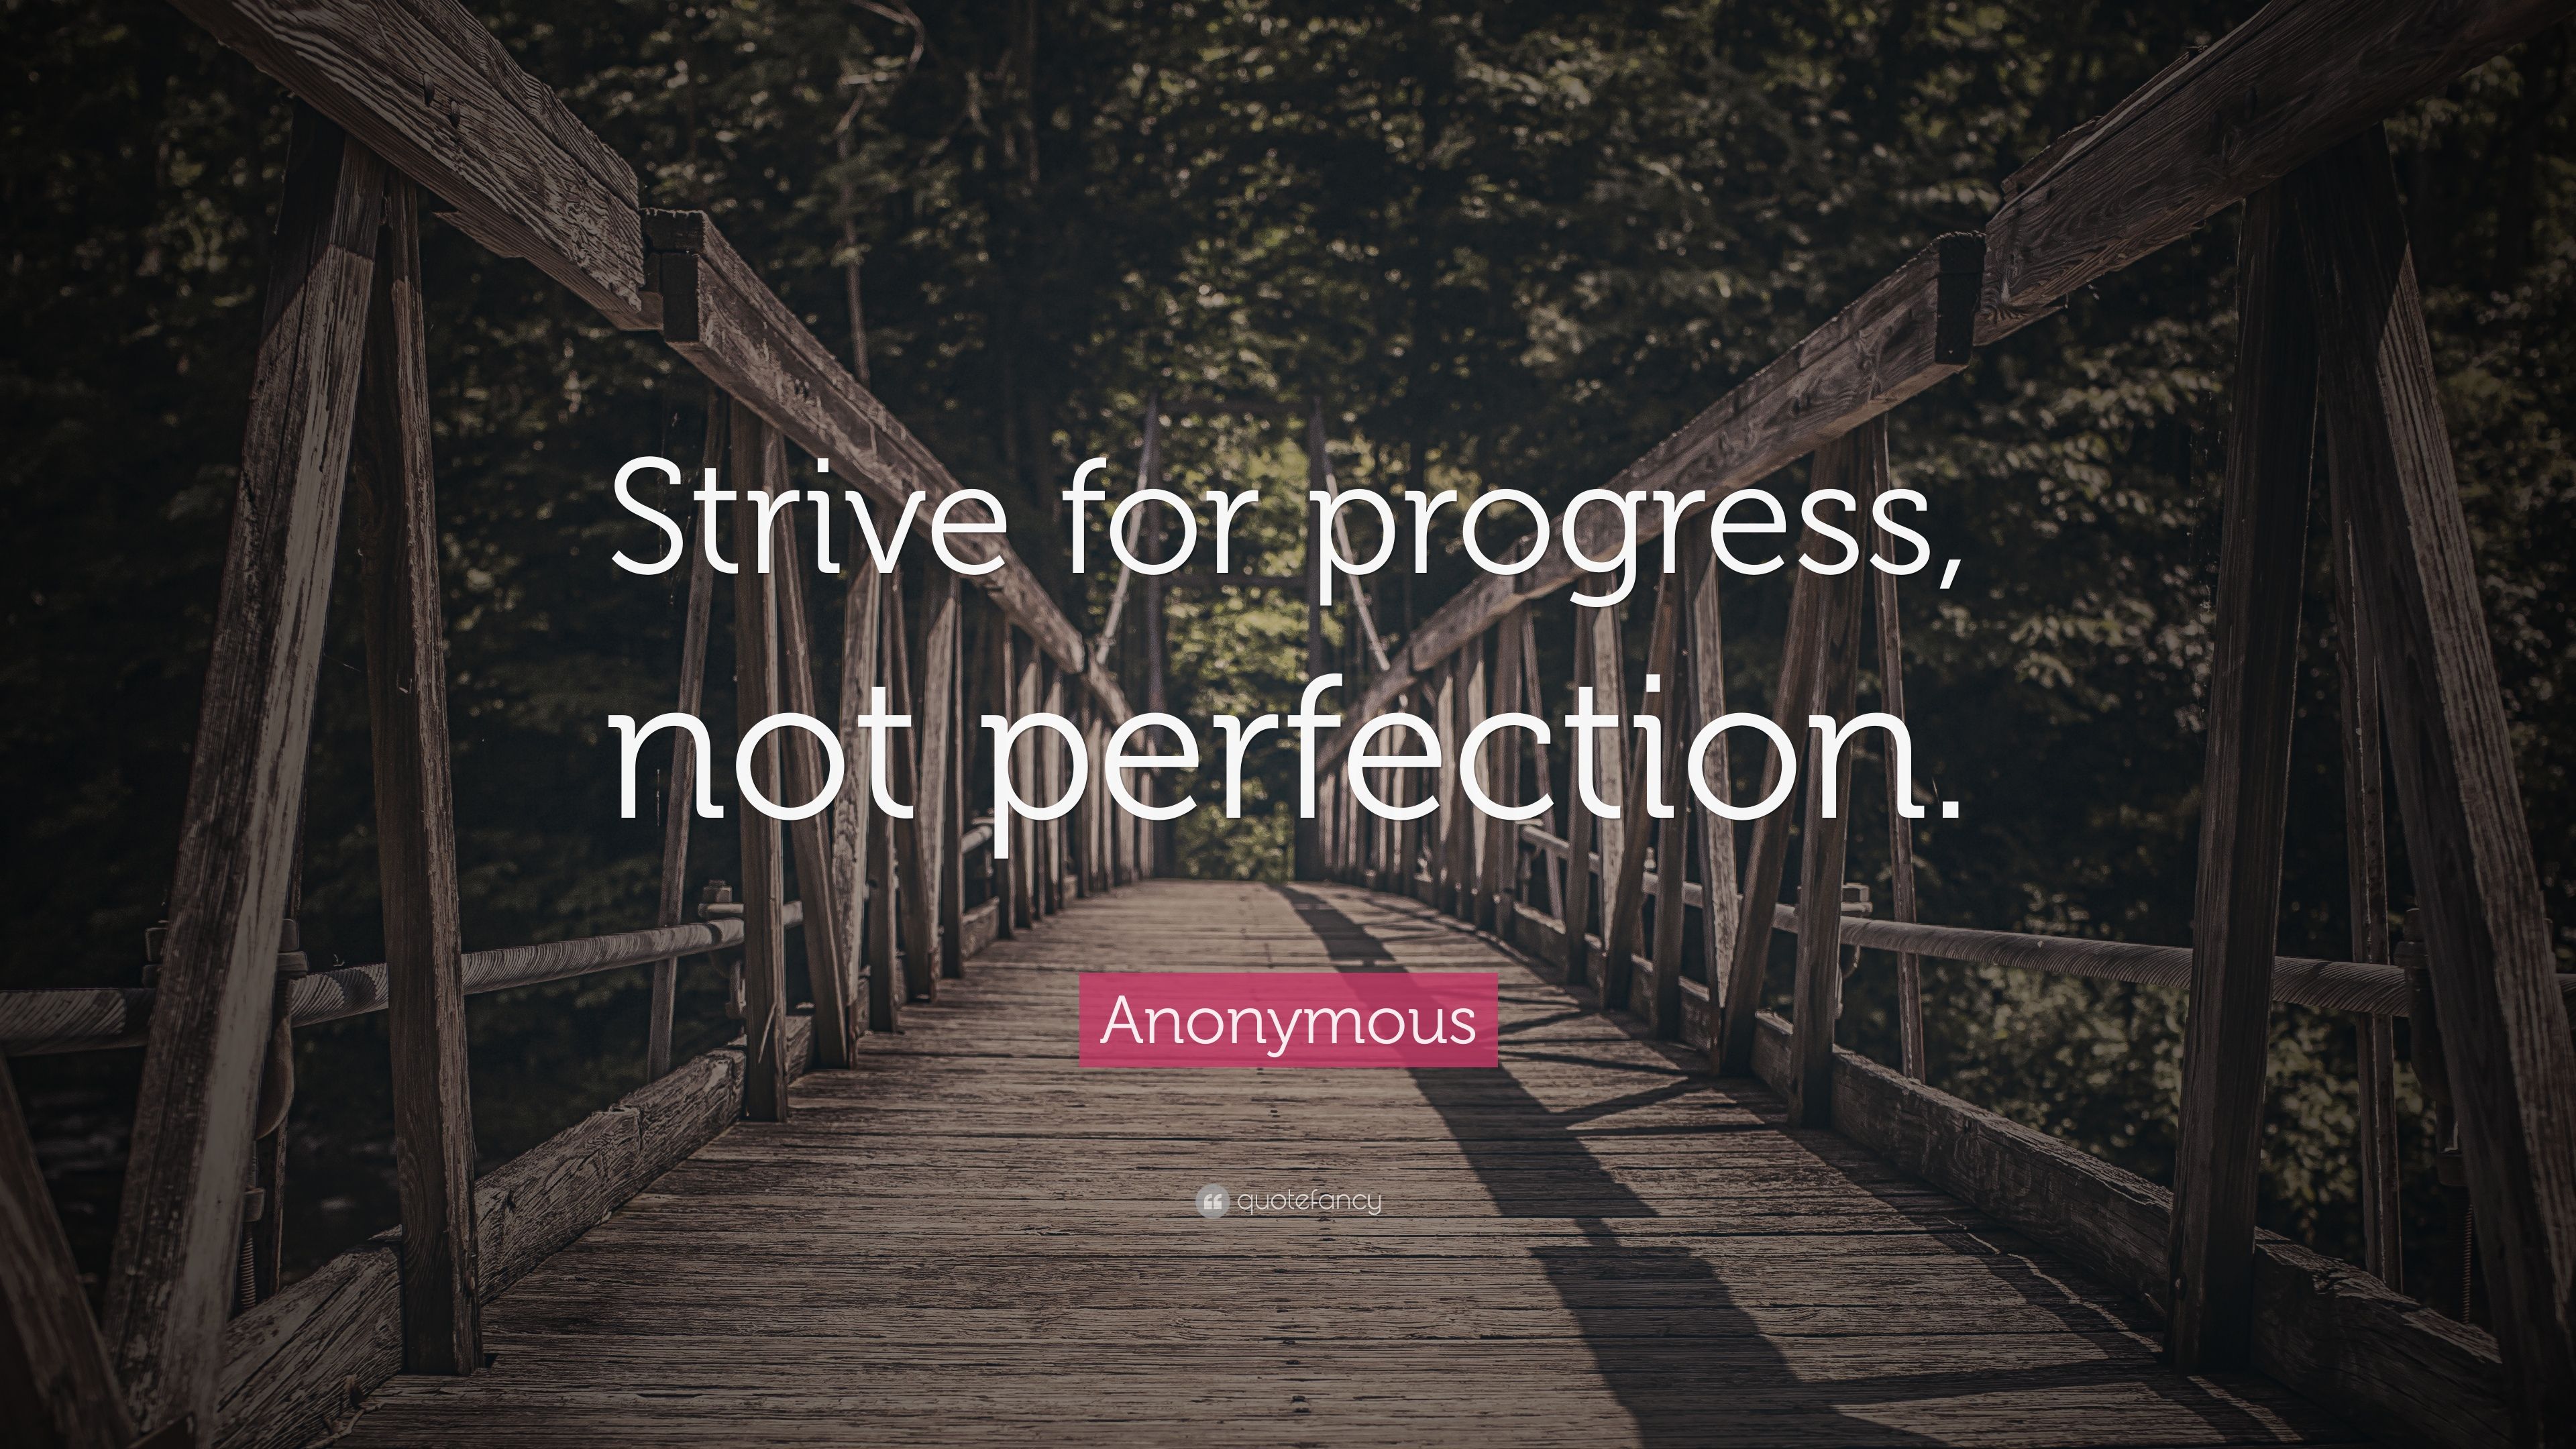 Anonymous Quote: “Strive for progress, not perfection.” (22 wallpaper)